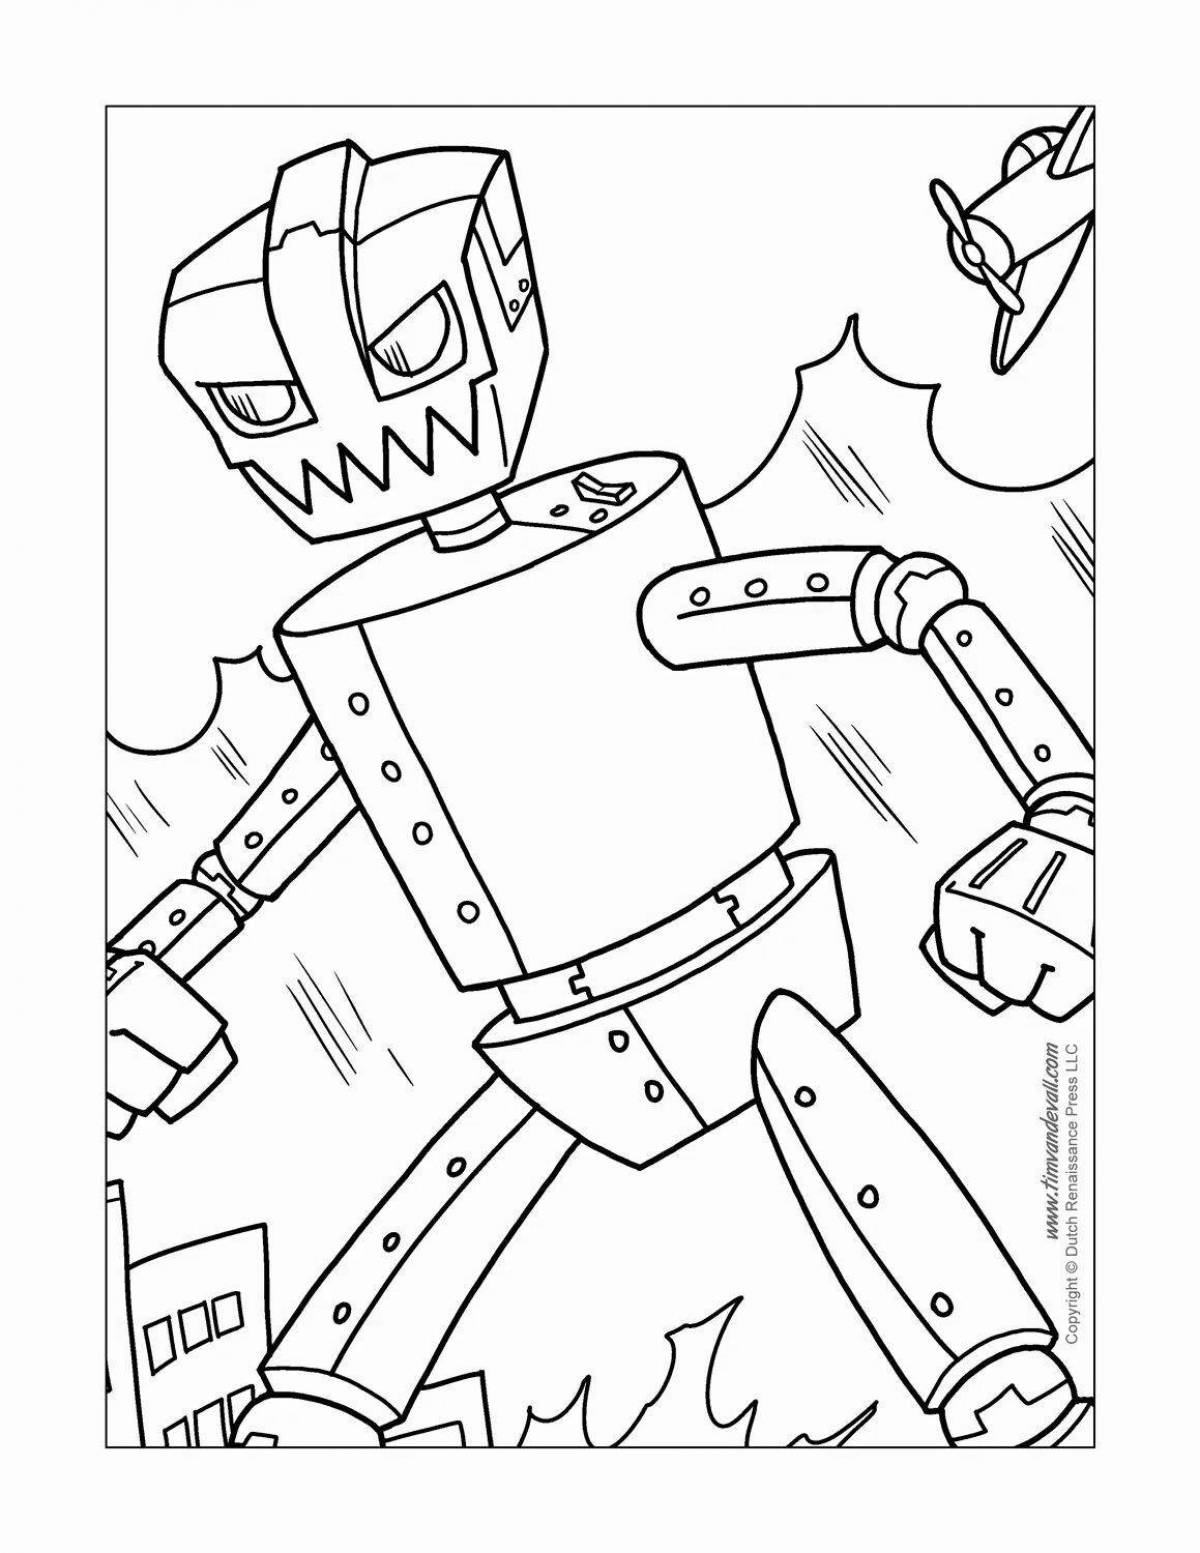 Sweet lego robot coloring page